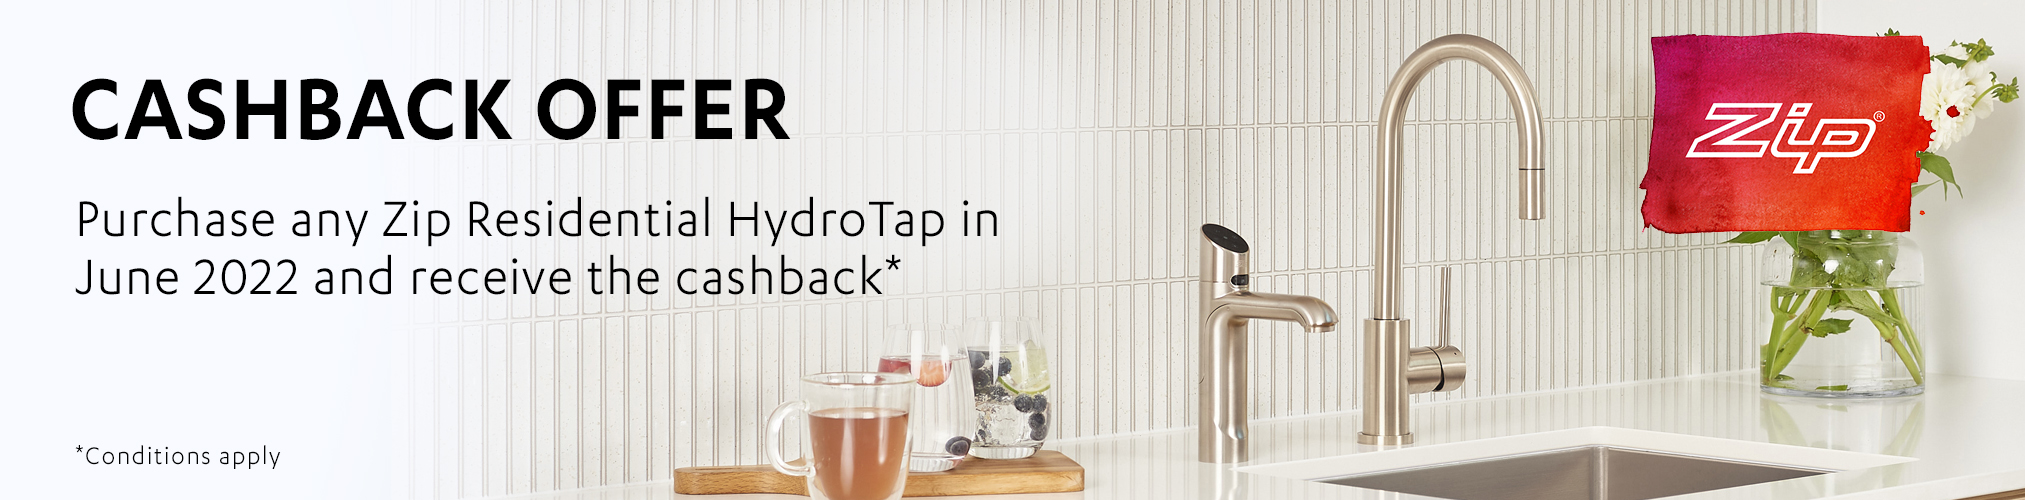 Purchase any ZIP Residential HydroTap and receive up to $300 Cashback